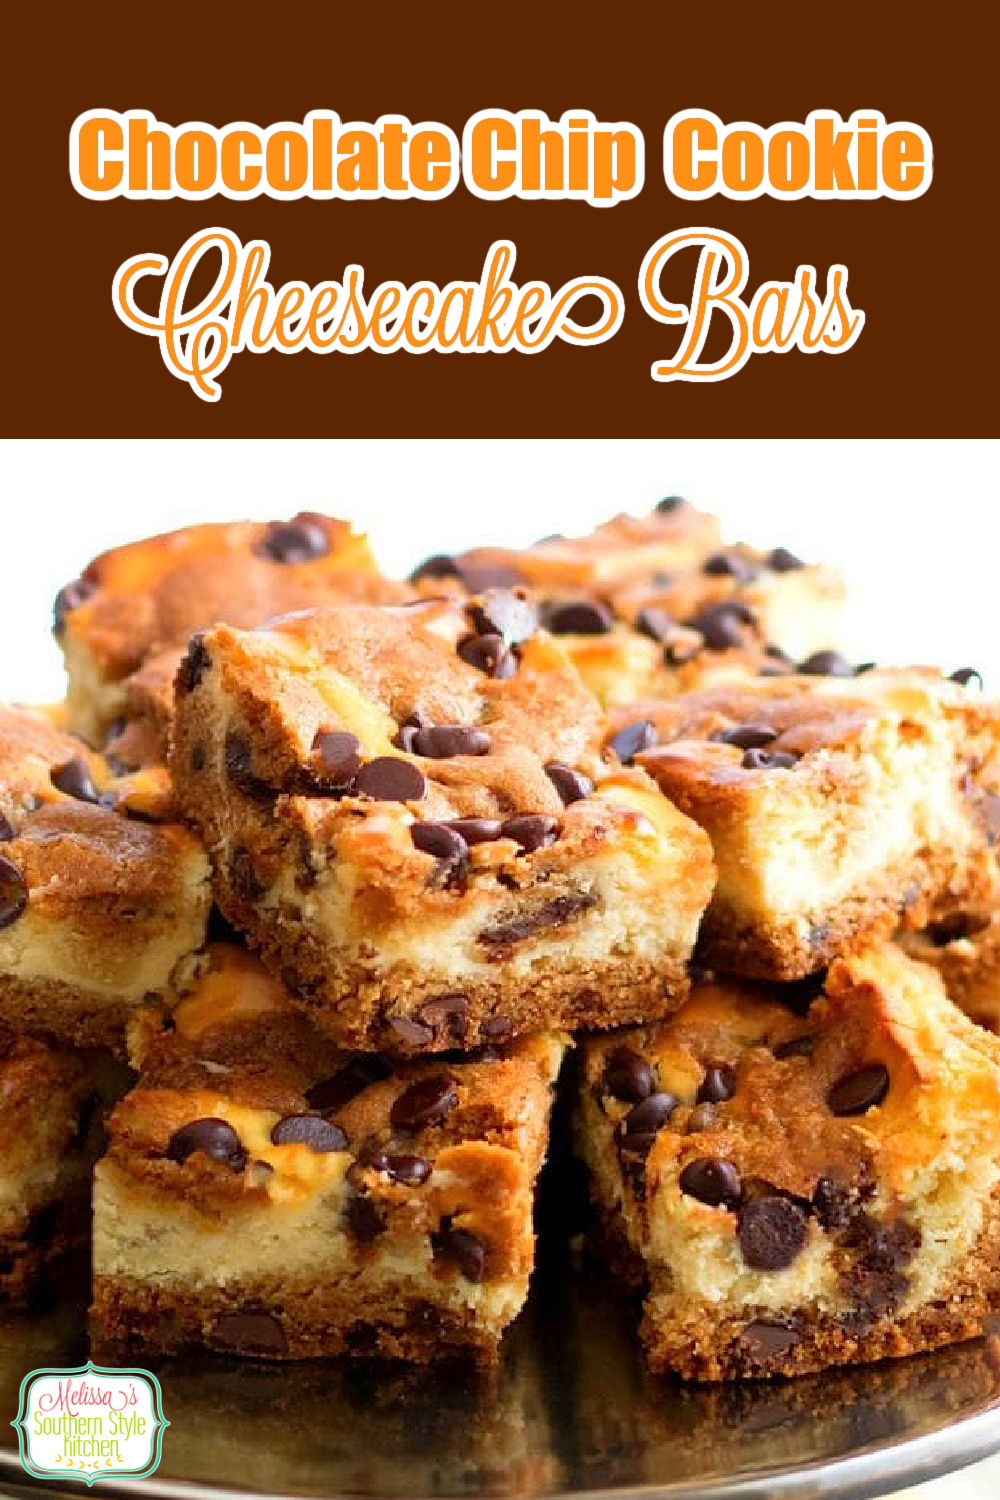 Cheesecake and chocolate chip cookies collide in these easy Chocolate Chip Cookie Cheesecake Bars #chocolatechipcookies #cheesecake #chocolatechipcheesecakebars #cookiebars #cookierecipes #holidaybaking #cheesecakerecipes #southerndesserts